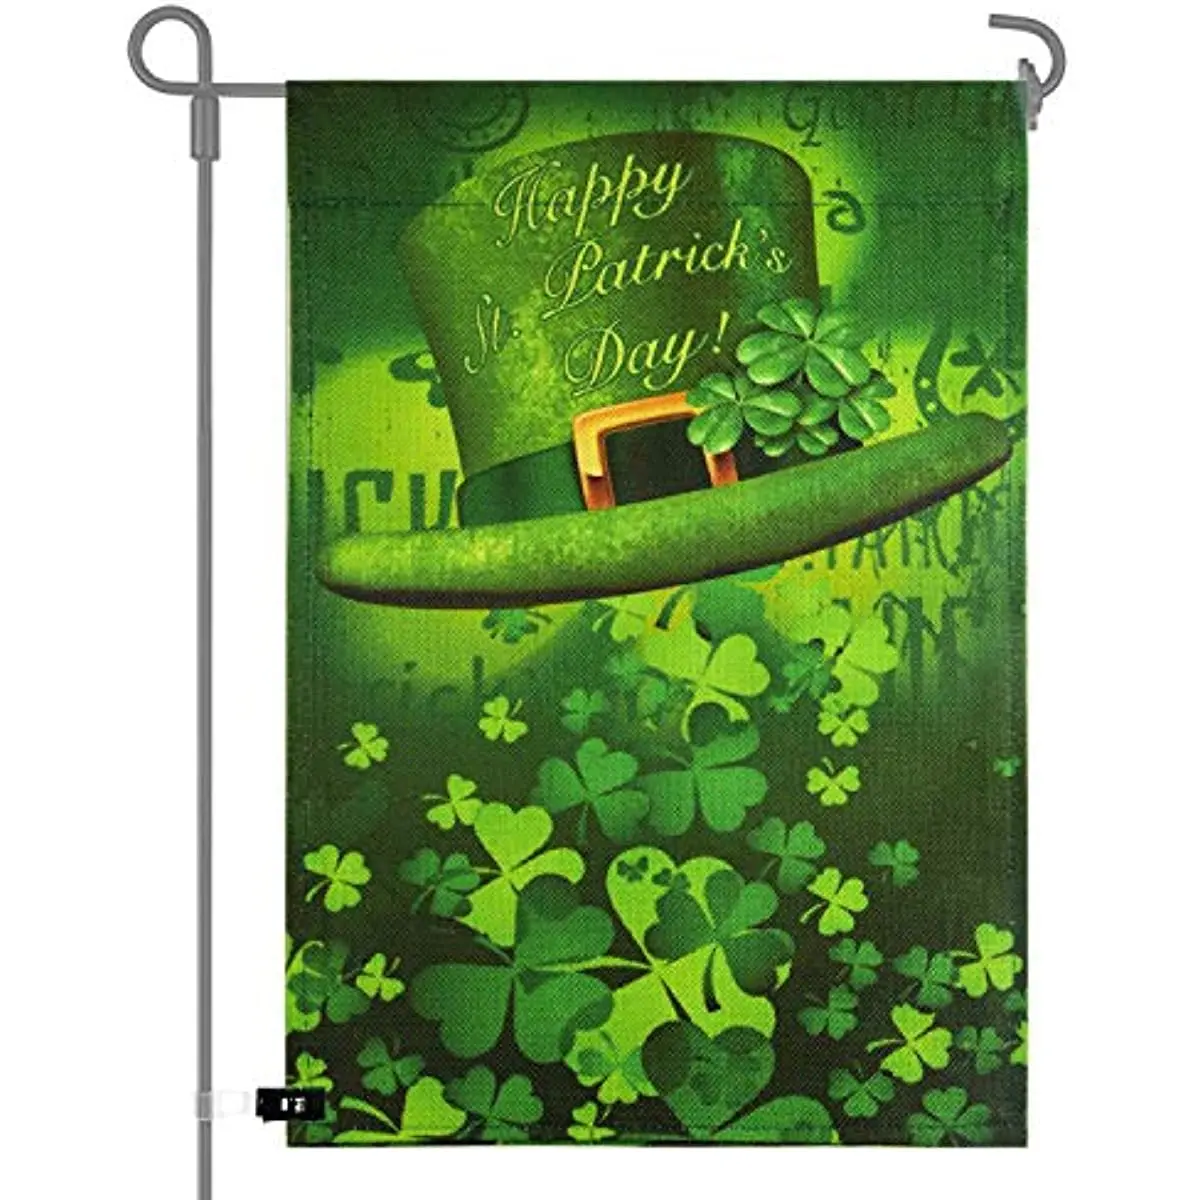 

St. Patrick's Day Garden Flag Shamrocks Home Flag Clovers Flag for Irish Holiday Garden and Home Decorations 12x18 Inches